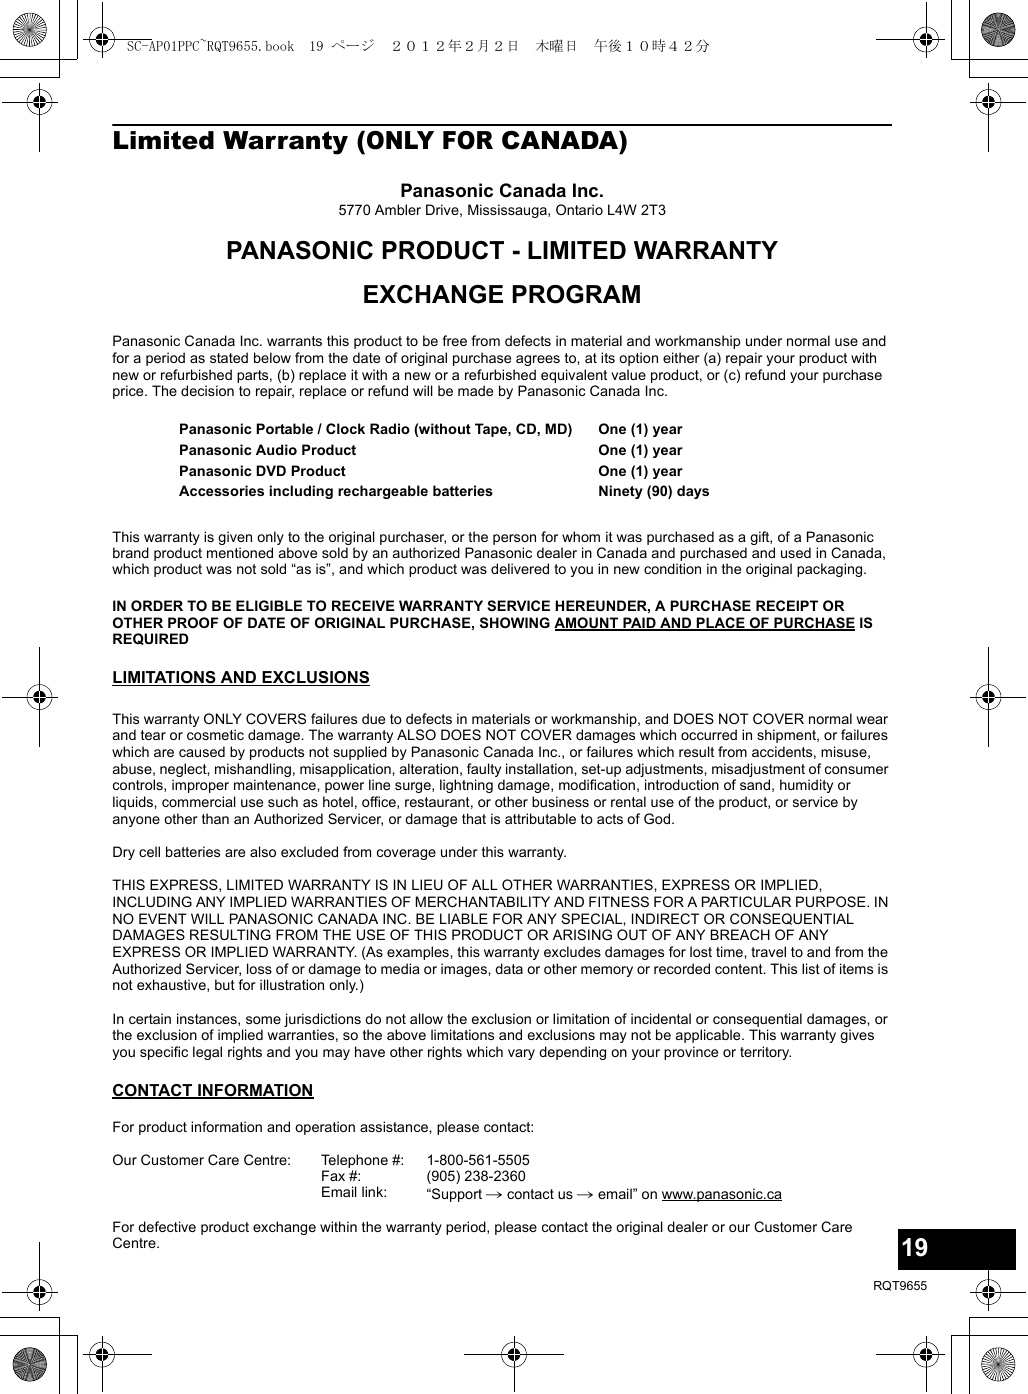 19RQT9655Limited Warranty (ONLY FOR CANADA)Panasonic Canada Inc.5770 Ambler Drive, Mississauga, Ontario L4W 2T3PANASONIC PRODUCT - LIMITED WARRANTYEXCHANGE PROGRAMPanasonic Canada Inc. warrants this product to be free from defects in material and workmanship under normal use and for a period as stated below from the date of original purchase agrees to, at its option either (a) repair your product with new or refurbished parts, (b) replace it with a new or a refurbished equivalent value product, or (c) refund your purchase price. The decision to repair, replace or refund will be made by Panasonic Canada Inc.This warranty is given only to the original purchaser, or the person for whom it was purchased as a gift, of a Panasonic brand product mentioned above sold by an authorized Panasonic dealer in Canada and purchased and used in Canada, which product was not sold “as is”, and which product was delivered to you in new condition in the original packaging.IN ORDER TO BE ELIGIBLE TO RECEIVE WARRANTY SERVICE HEREUNDER, A PURCHASE RECEIPT OR OTHER PROOF OF DATE OF ORIGINAL PURCHASE, SHOWING AMOUNT PAID AND PLACE OF PURCHASE IS REQUIRED LIMITATIONS AND EXCLUSIONSThis warranty ONLY COVERS failures due to defects in materials or workmanship, and DOES NOT COVER normal wear and tear or cosmetic damage. The warranty ALSO DOES NOT COVER damages which occurred in shipment, or failures which are caused by products not supplied by Panasonic Canada Inc., or failures which result from accidents, misuse, abuse, neglect, mishandling, misapplication, alteration, faulty installation, set-up adjustments, misadjustment of consumer controls, improper maintenance, power line surge, lightning damage, modification, introduction of sand, humidity or liquids, commercial use such as hotel, office, restaurant, or other business or rental use of the product, or service by anyone other than an Authorized Servicer, or damage that is attributable to acts of God.Dry cell batteries are also excluded from coverage under this warranty.THIS EXPRESS, LIMITED WARRANTY IS IN LIEU OF ALL OTHER WARRANTIES, EXPRESS OR IMPLIED, INCLUDING ANY IMPLIED WARRANTIES OF MERCHANTABILITY AND FITNESS FOR A PARTICULAR PURPOSE. IN NO EVENT WILL PANASONIC CANADA INC. BE LIABLE FOR ANY SPECIAL, INDIRECT OR CONSEQUENTIAL DAMAGES RESULTING FROM THE USE OF THIS PRODUCT OR ARISING OUT OF ANY BREACH OF ANY EXPRESS OR IMPLIED WARRANTY. (As examples, this warranty excludes damages for lost time, travel to and from the Authorized Servicer, loss of or damage to media or images, data or other memory or recorded content. This list of items is not exhaustive, but for illustration only.)In certain instances, some jurisdictions do not allow the exclusion or limitation of incidental or consequential damages, or the exclusion of implied warranties, so the above limitations and exclusions may not be applicable. This warranty gives you specific legal rights and you may have other rights which vary depending on your province or territory.CONTACT INFORMATIONPanasonic Portable / Clock Radio (without Tape, CD, MD)Panasonic Audio ProductPanasonic DVD ProductAccessories including rechargeable batteriesOne (1) yearOne (1) yearOne (1) yearNinety (90) daysFor product information and operation assistance, please contact:Our Customer Care Centre: Telephone #:Fax #:Email link:1-800-561-5505(905) 238-2360“Support # contact us # email” on www.panasonic.caFor defective product exchange within the warranty period, please contact the original dealer or our Customer Care Centre.SC-AP01PPC~RQT9655.book  19 ページ  ２０１２年２月２日　木曜日　午後１０時４２分